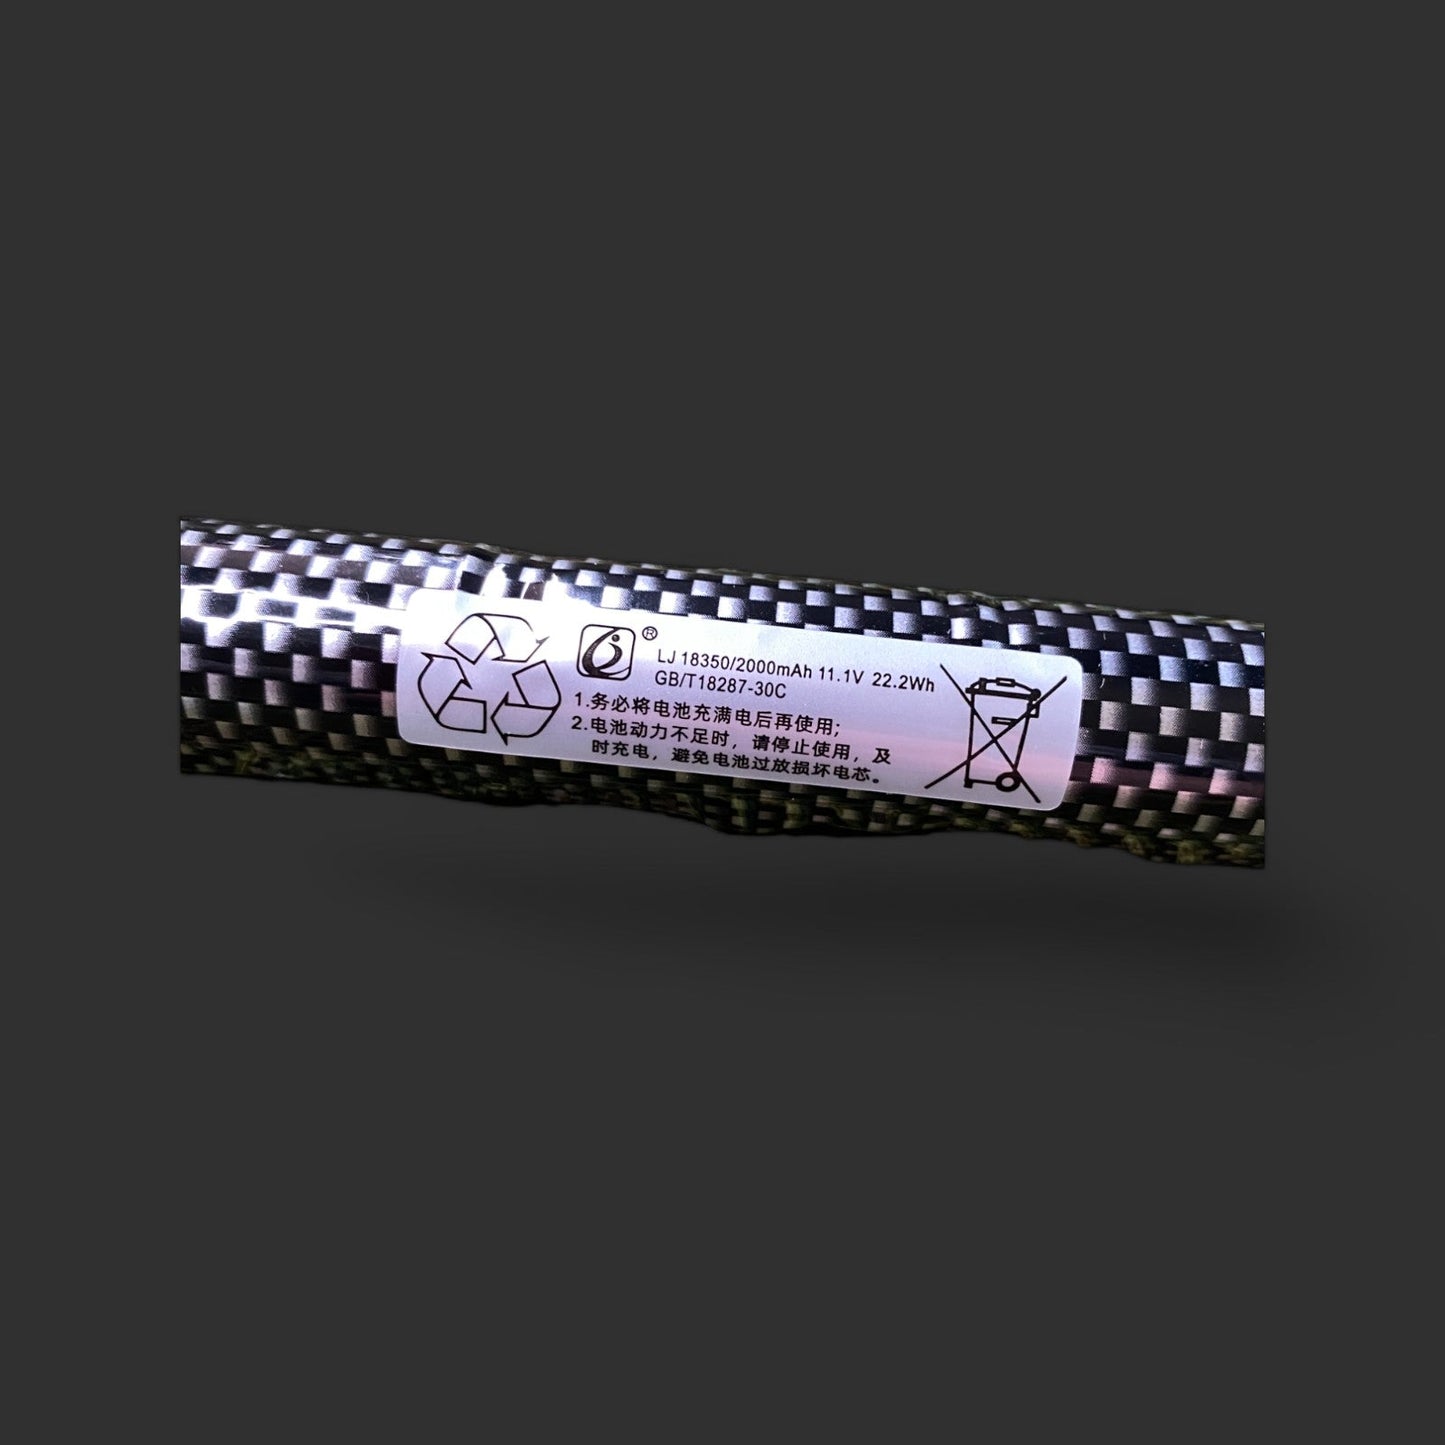 BlasterMaster 11.1V 18350 2000mAh SM2 30C long skin battery with white informational label detailing recycling symbols, high-efficiency battery caution icons, and Chinese text on a gray background.